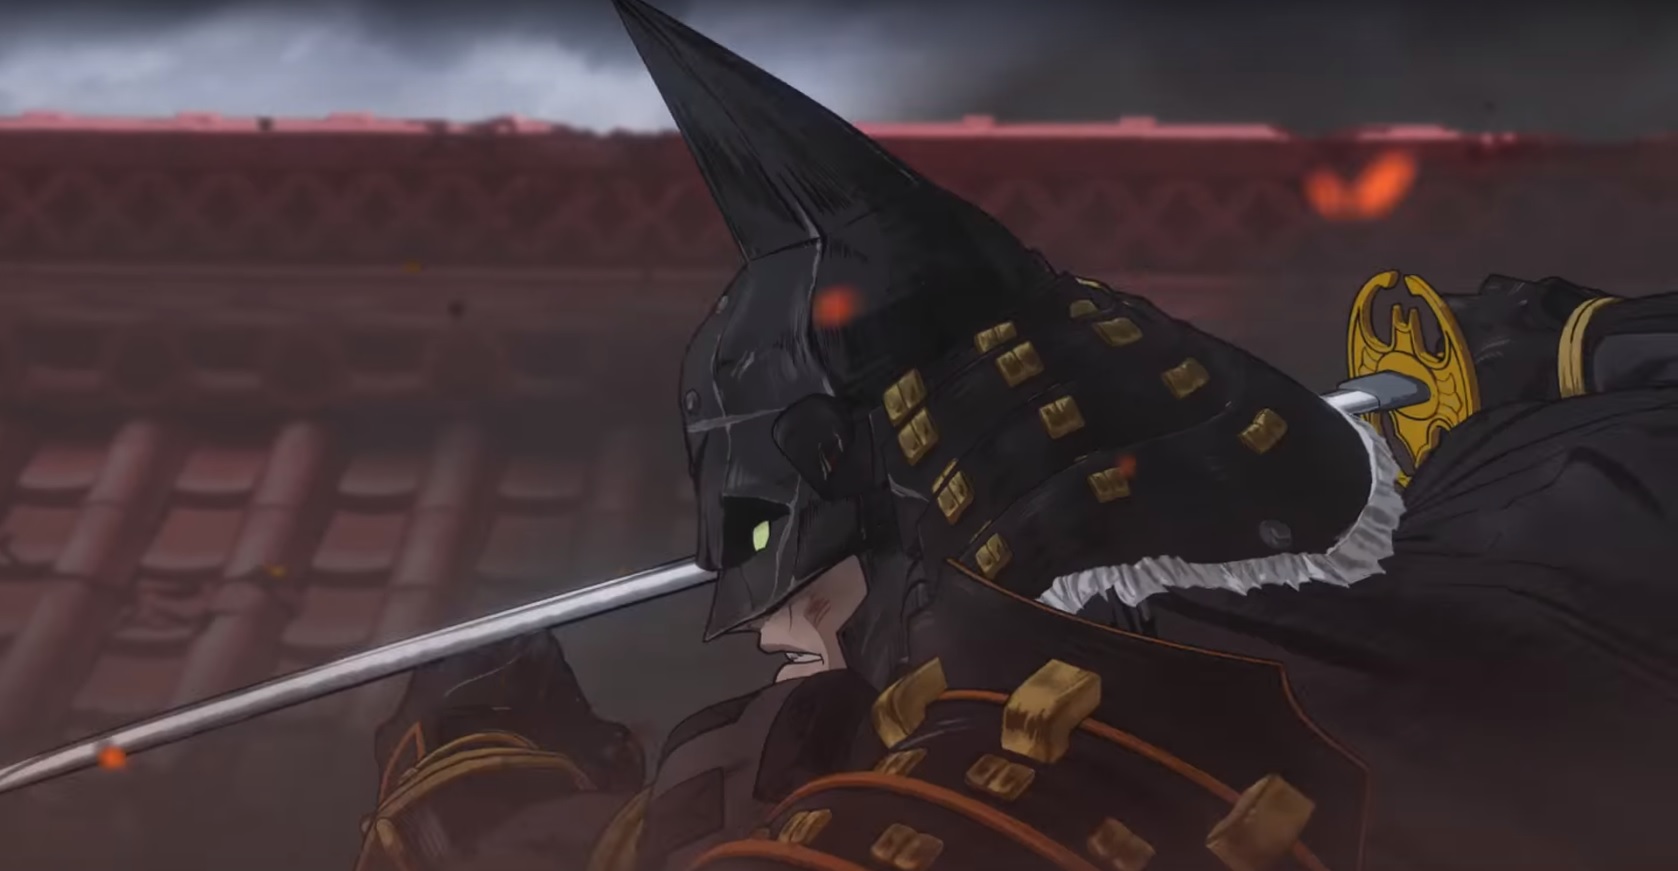 Batman Ninja Poses Different Questions - Zombies in My Blog